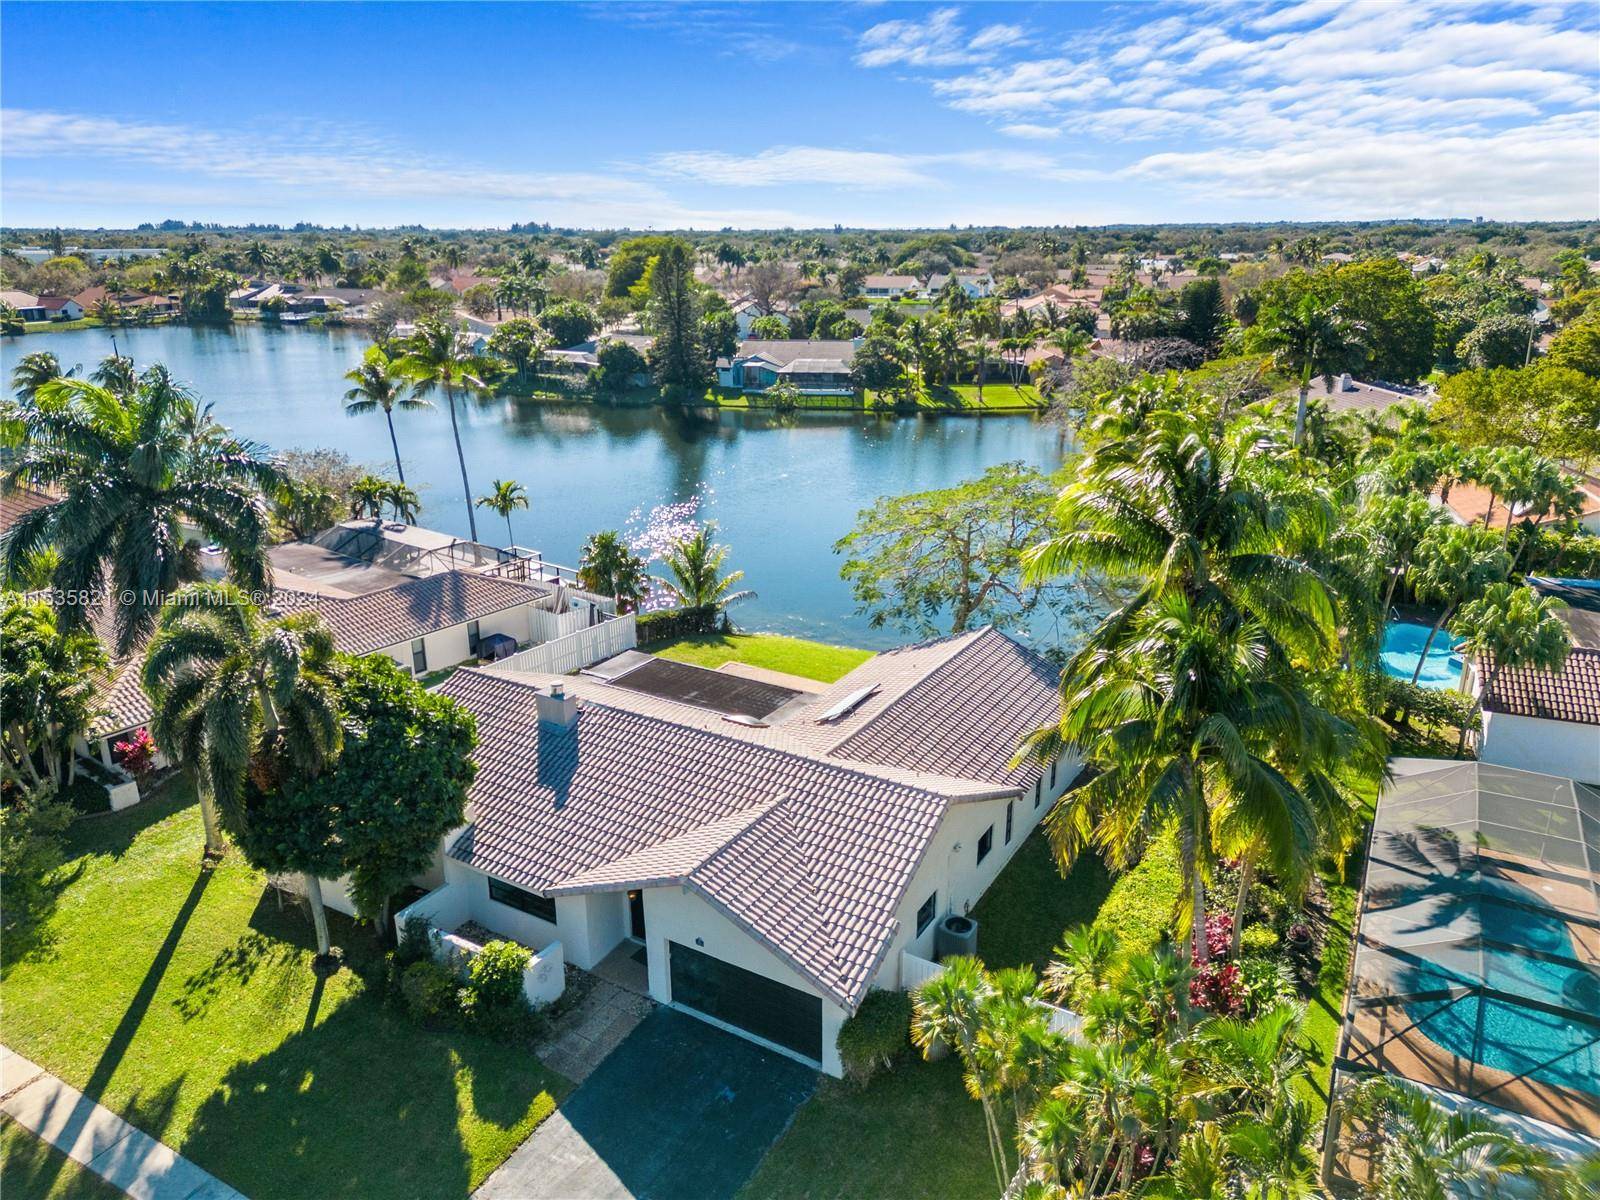 Welcome to this remarkable fully remodeled 4 bed, 3 bath home featuring a picturesque lake view in desirable Plantation, FL !